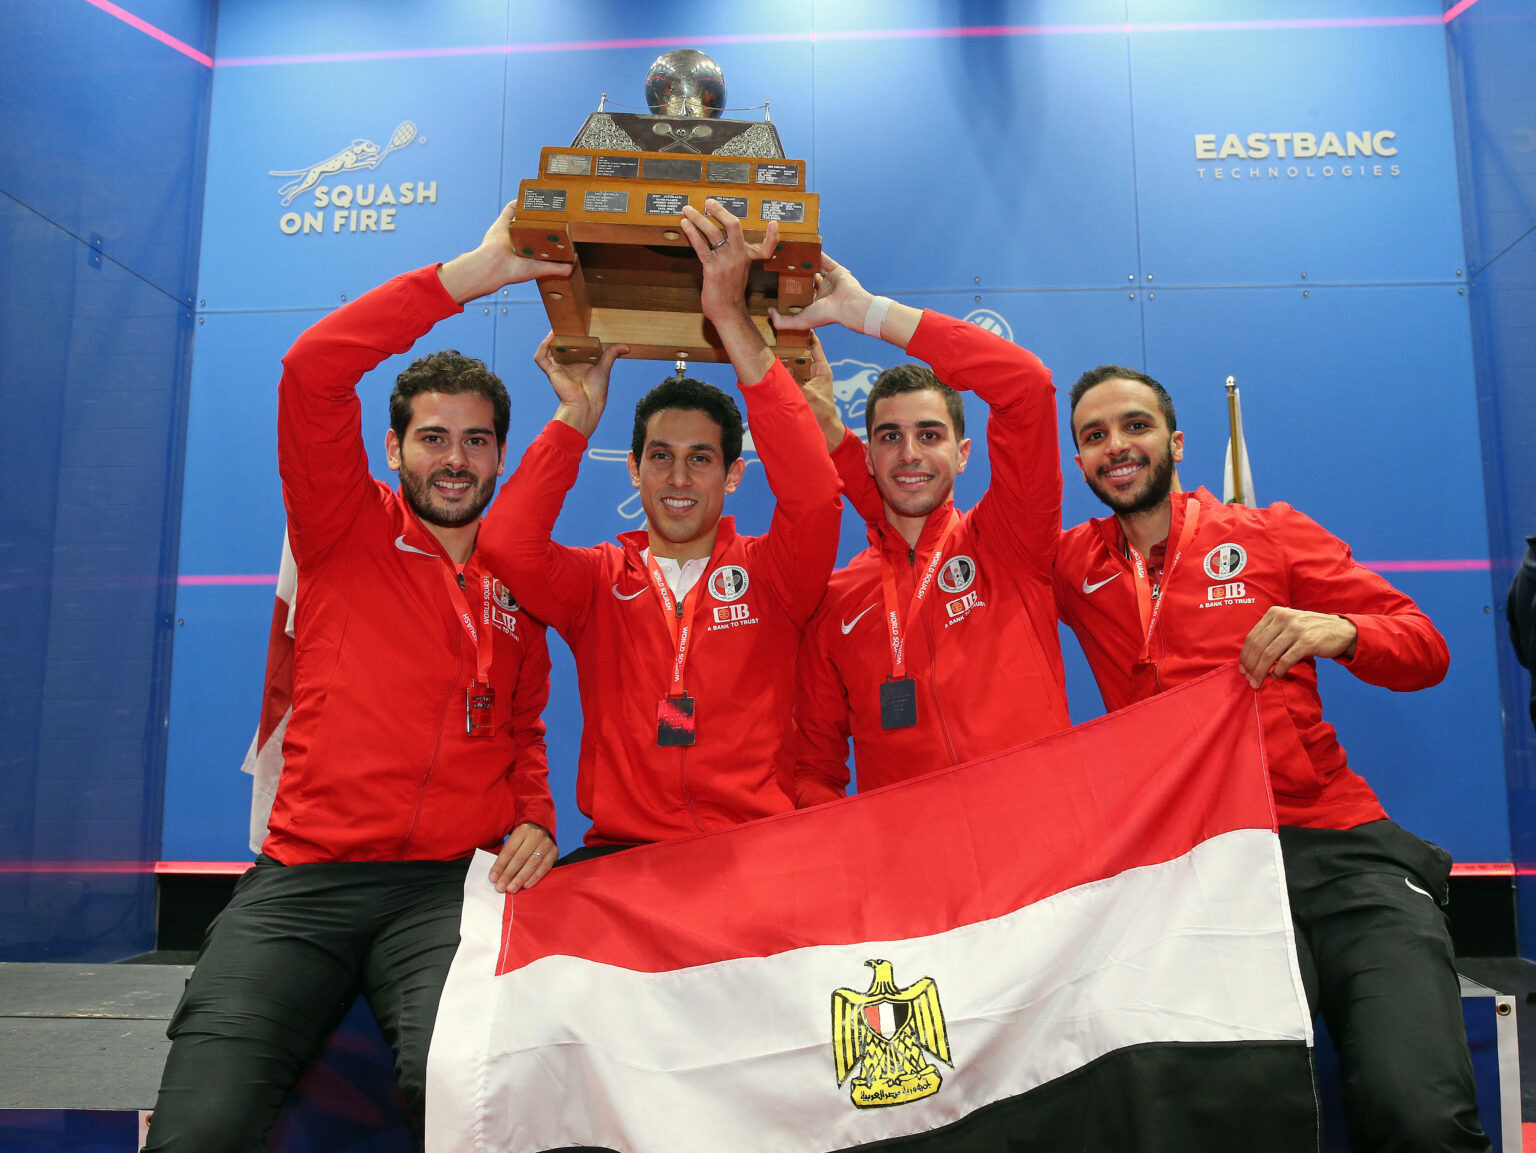 Men’s World Team Squash Championship in Kuala Lumpur, where Egypt were due to defend the title they won in 2019, has been cancelled following the emerge of new COVID-19 variant Omicron ©Getty Images 